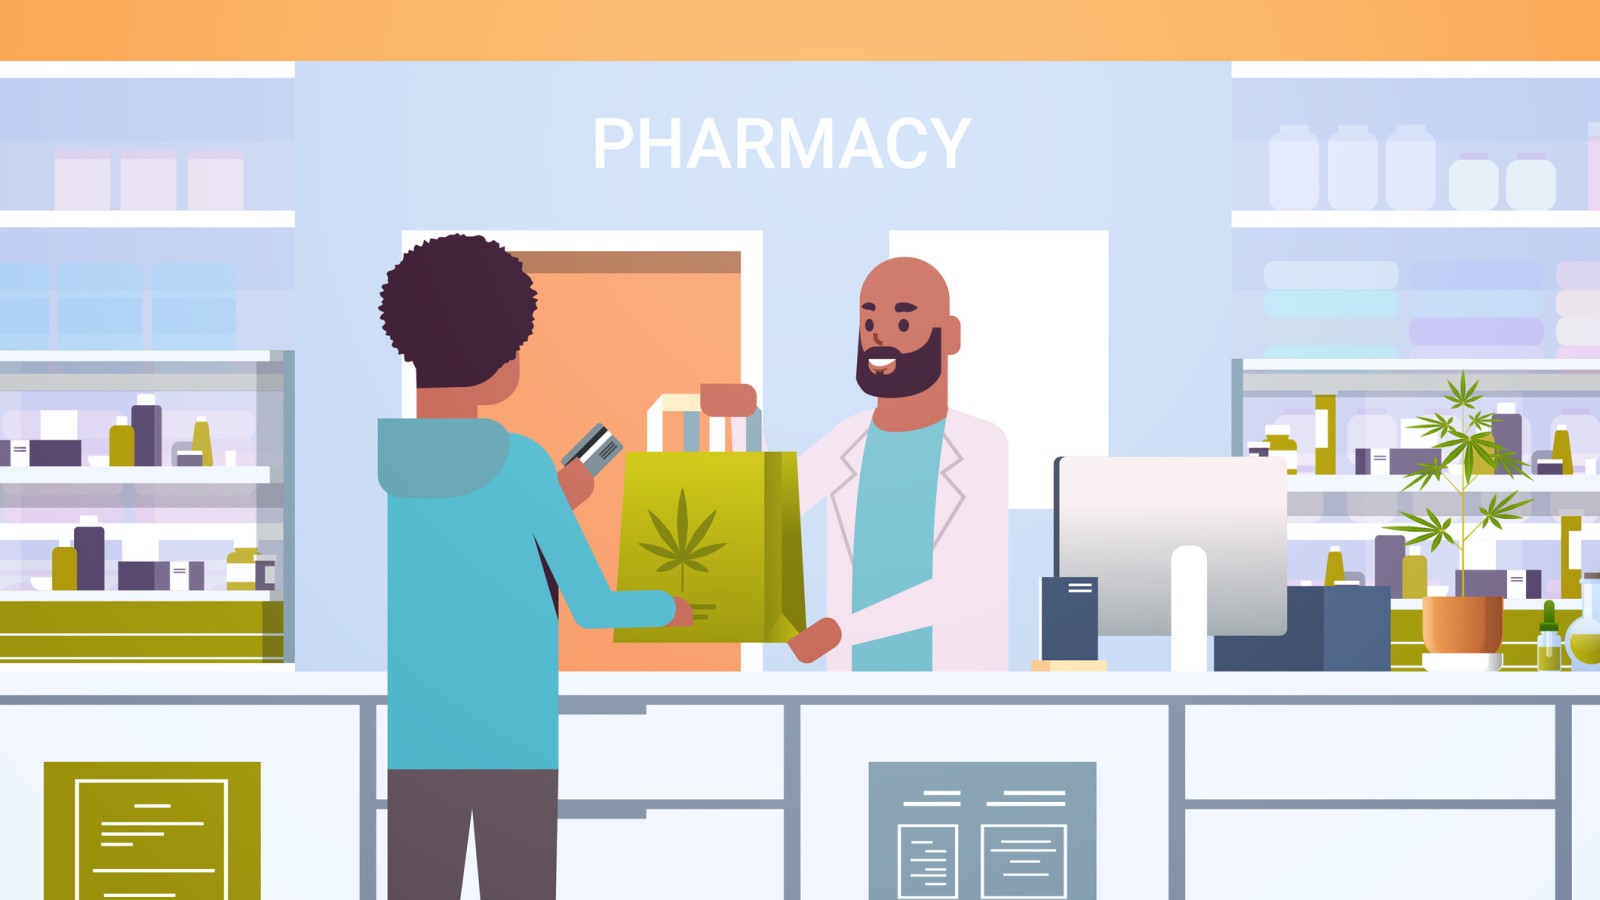 Cartoon image of a pharmacist handing an order to a customer.